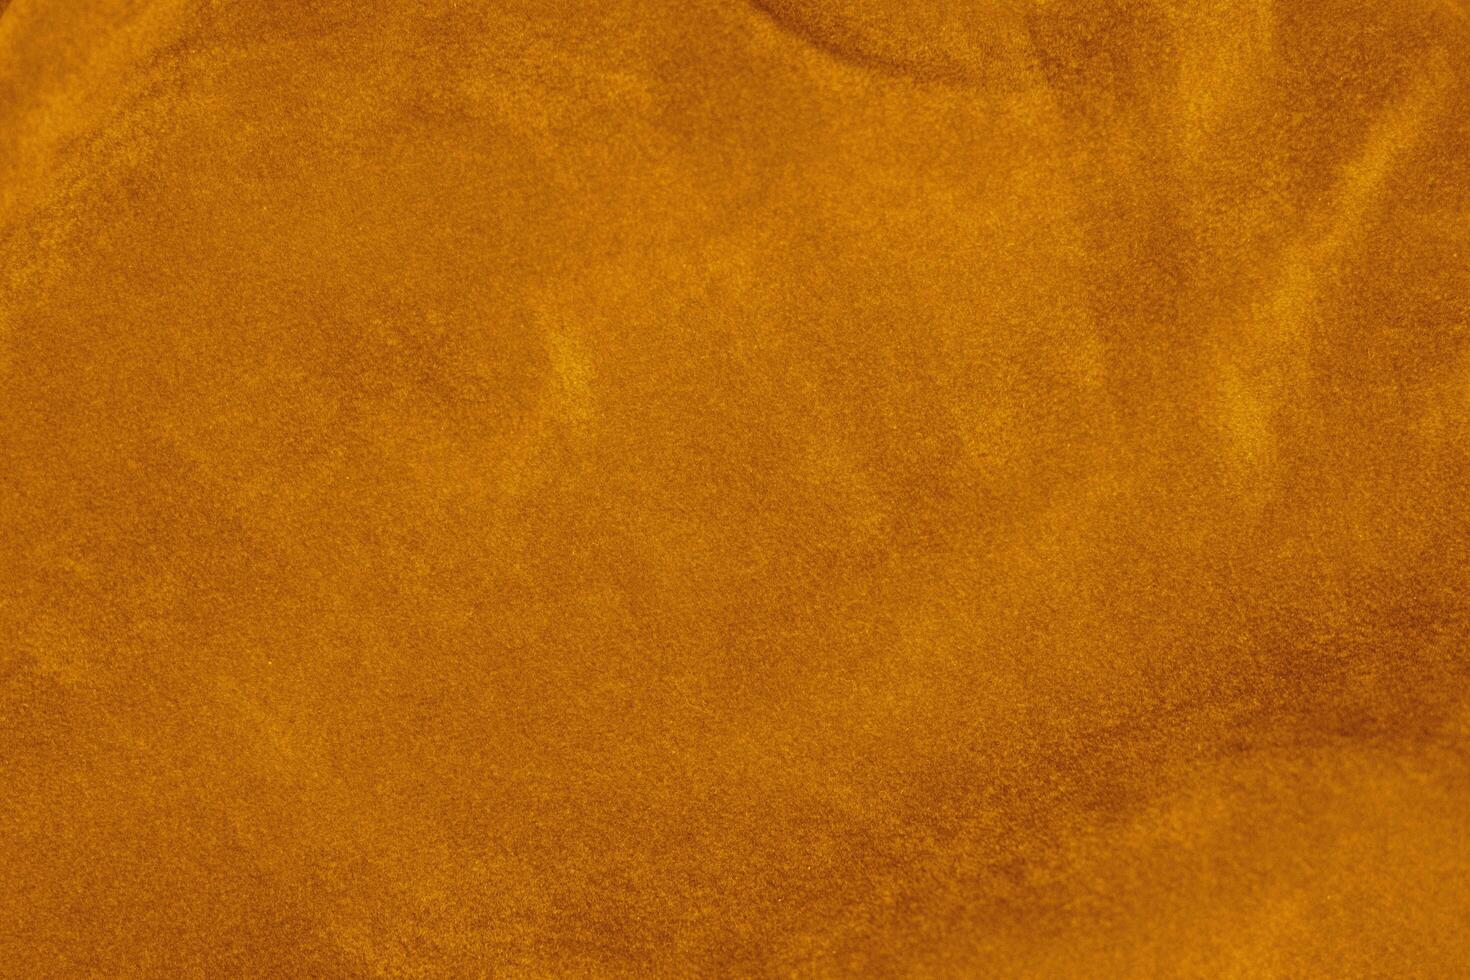 light orange velvet fabric texture used as background. silk color saffron fabric background of soft and smooth textile material. crushed velvet .luxury sun light tone for silk. photo